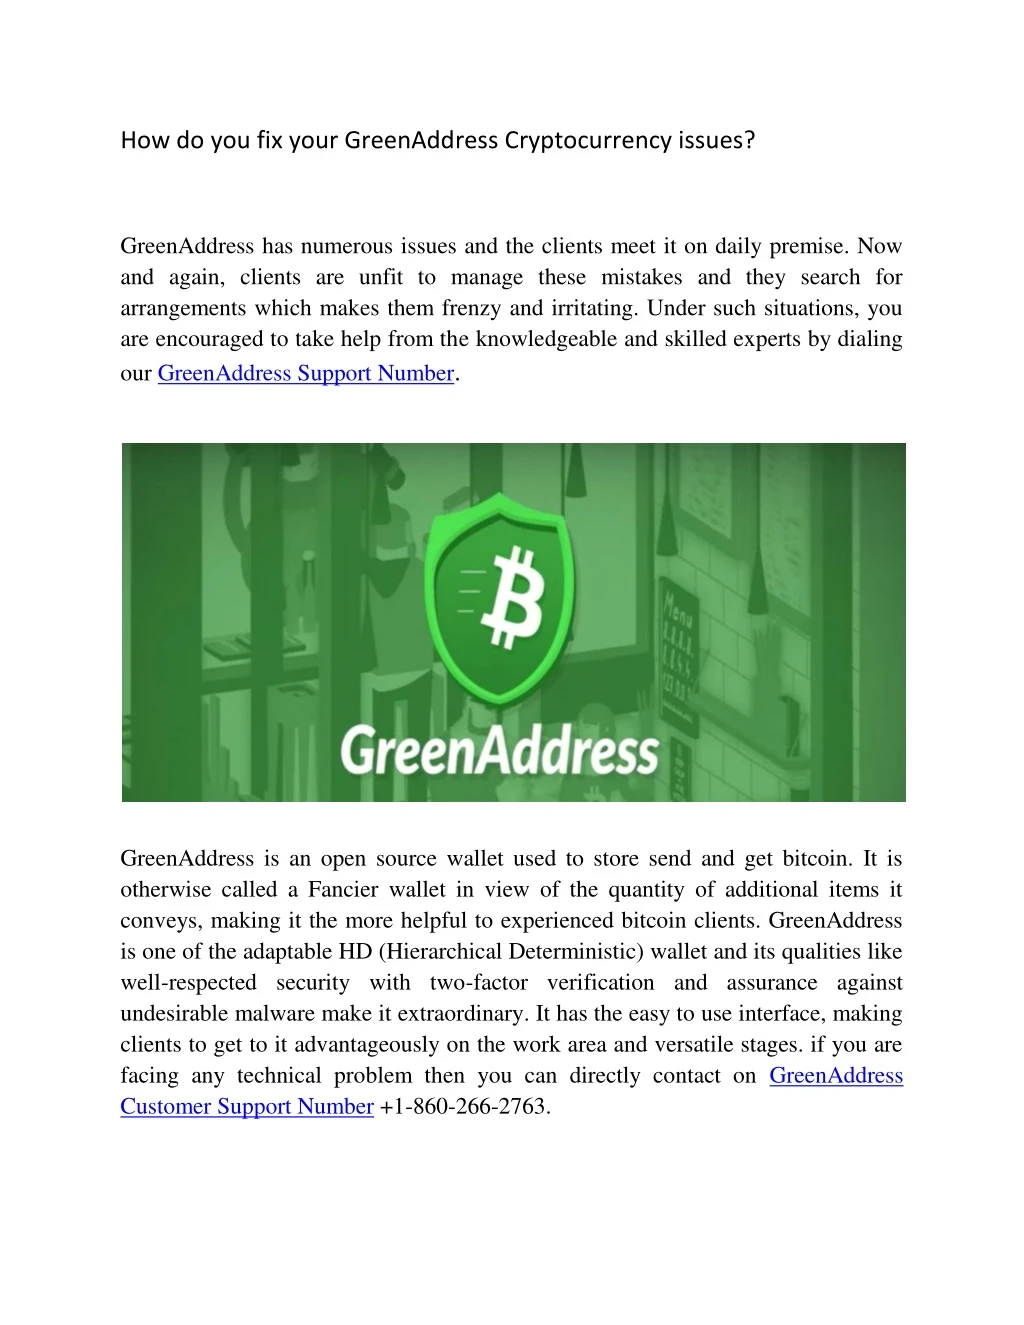 how do you fix your greenaddress cryptocurrency